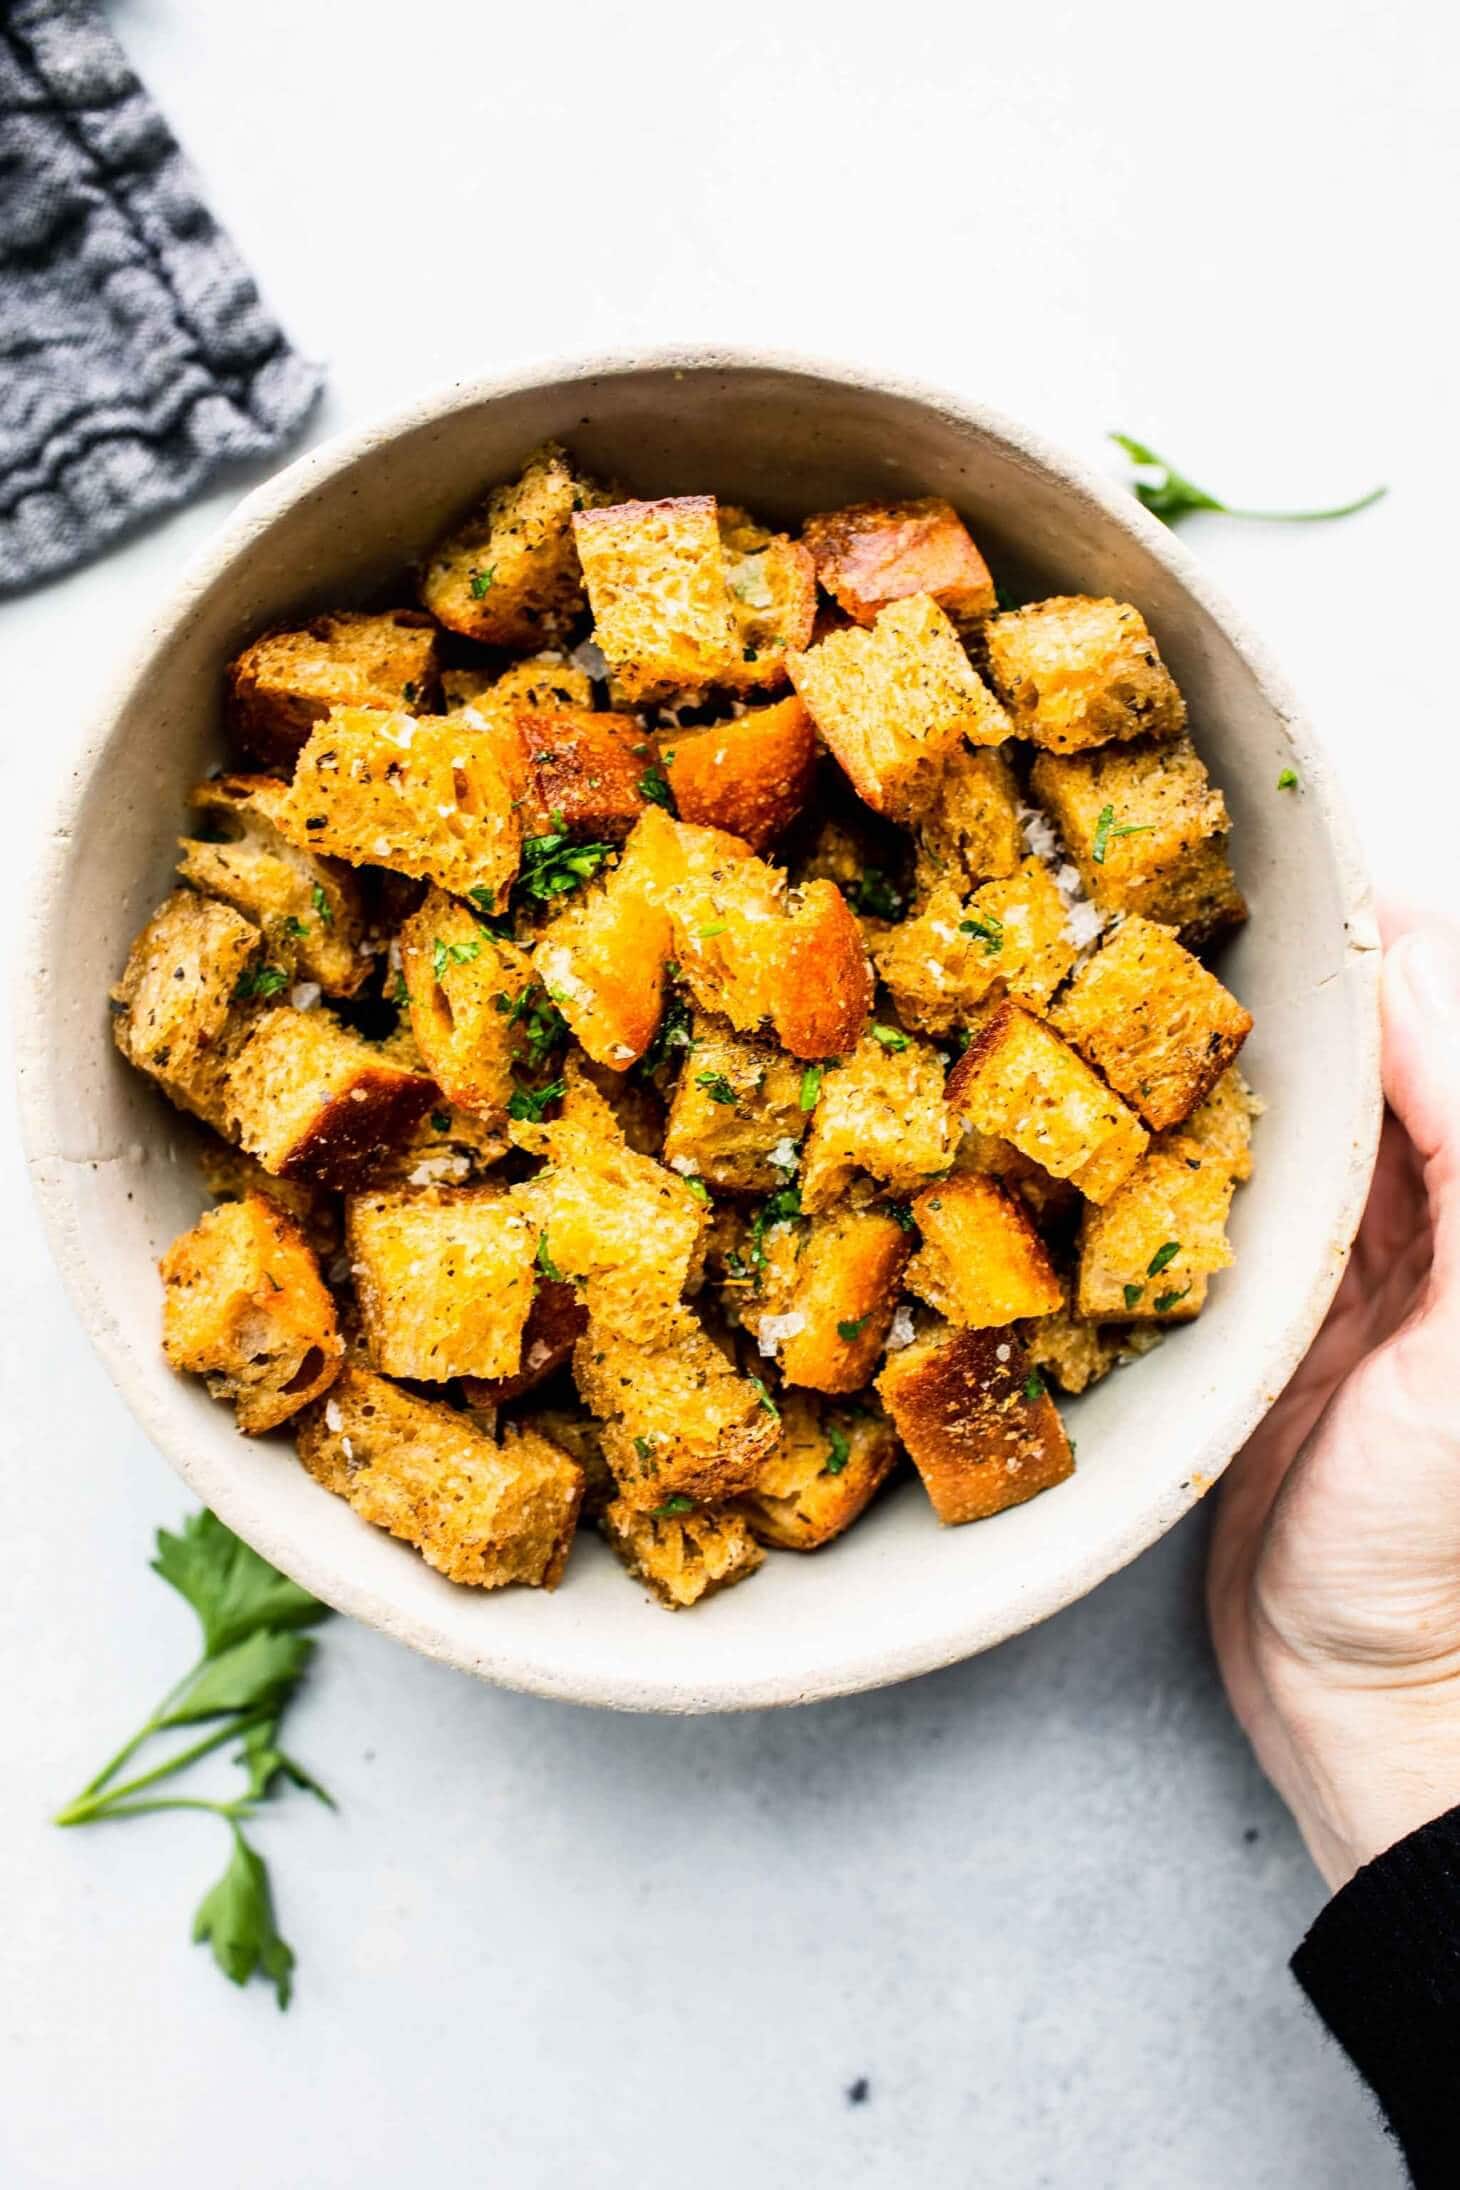 BEST Homemade Crouton Recipe (How to Make Croutons)